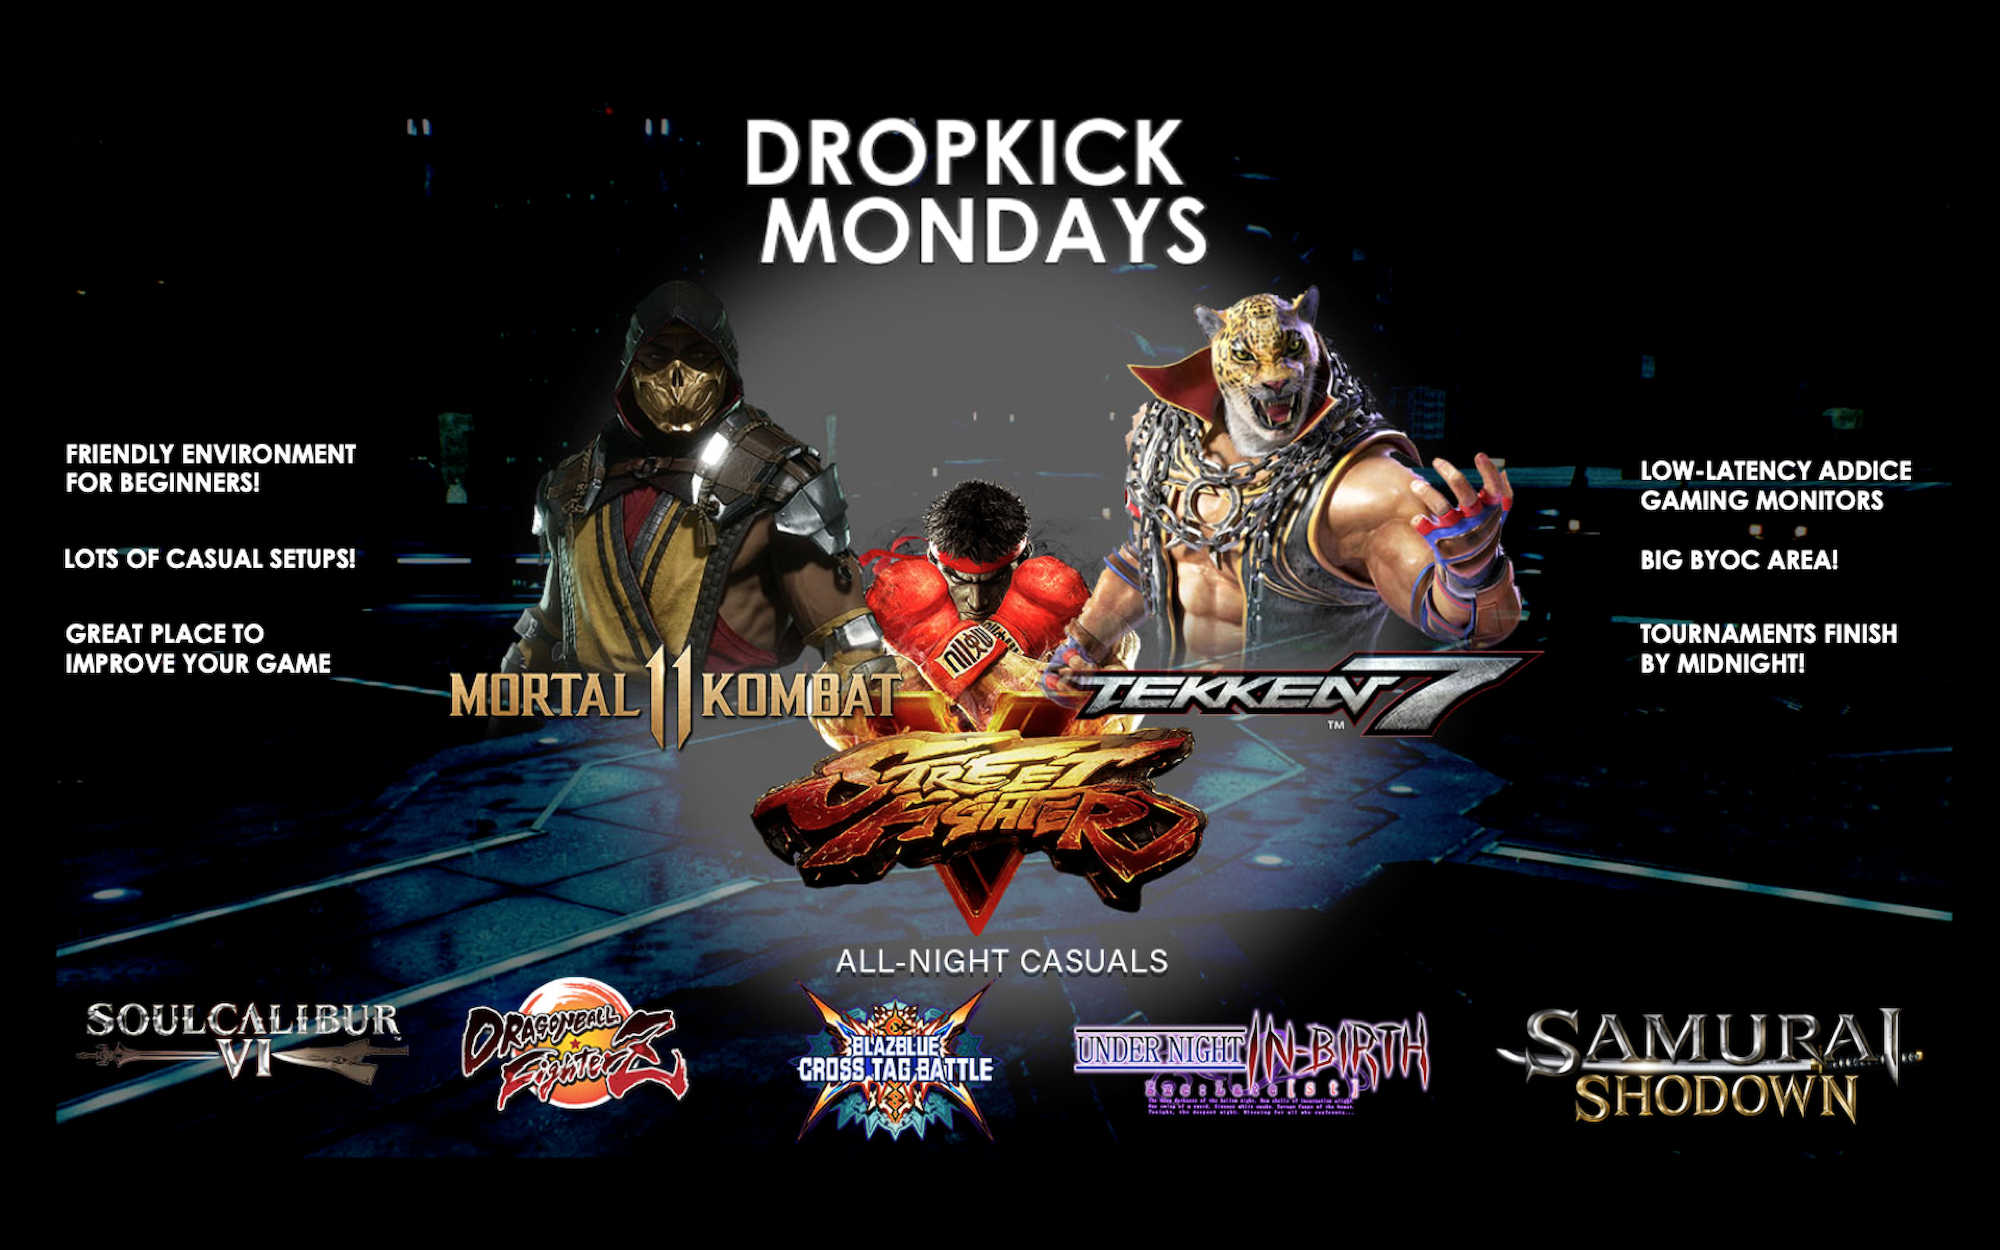 Dropkick Mondays – Weekly Fighting Game Tourney/Casuals in Huntington Beach